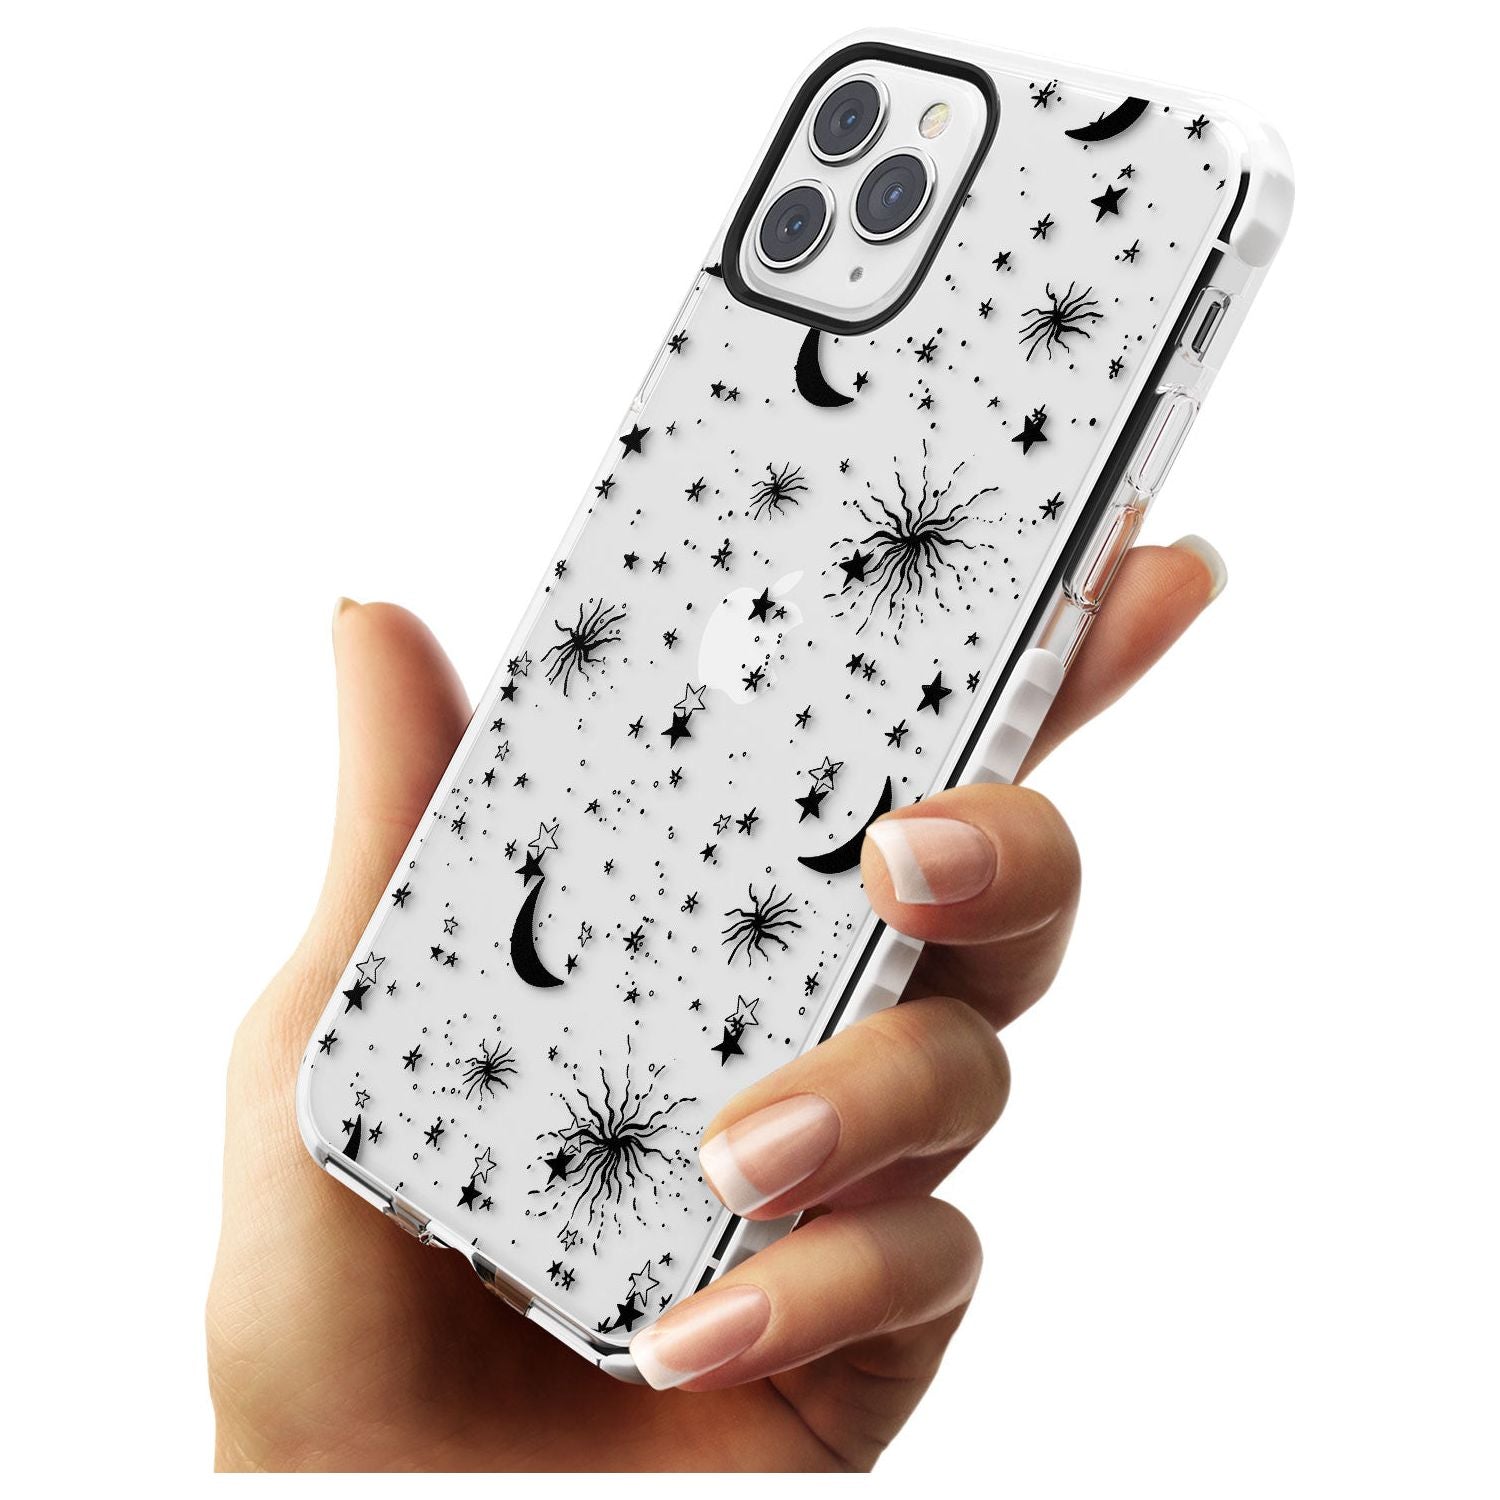 Moons & Stars Impact Phone Case for iPhone 11 Pro Max